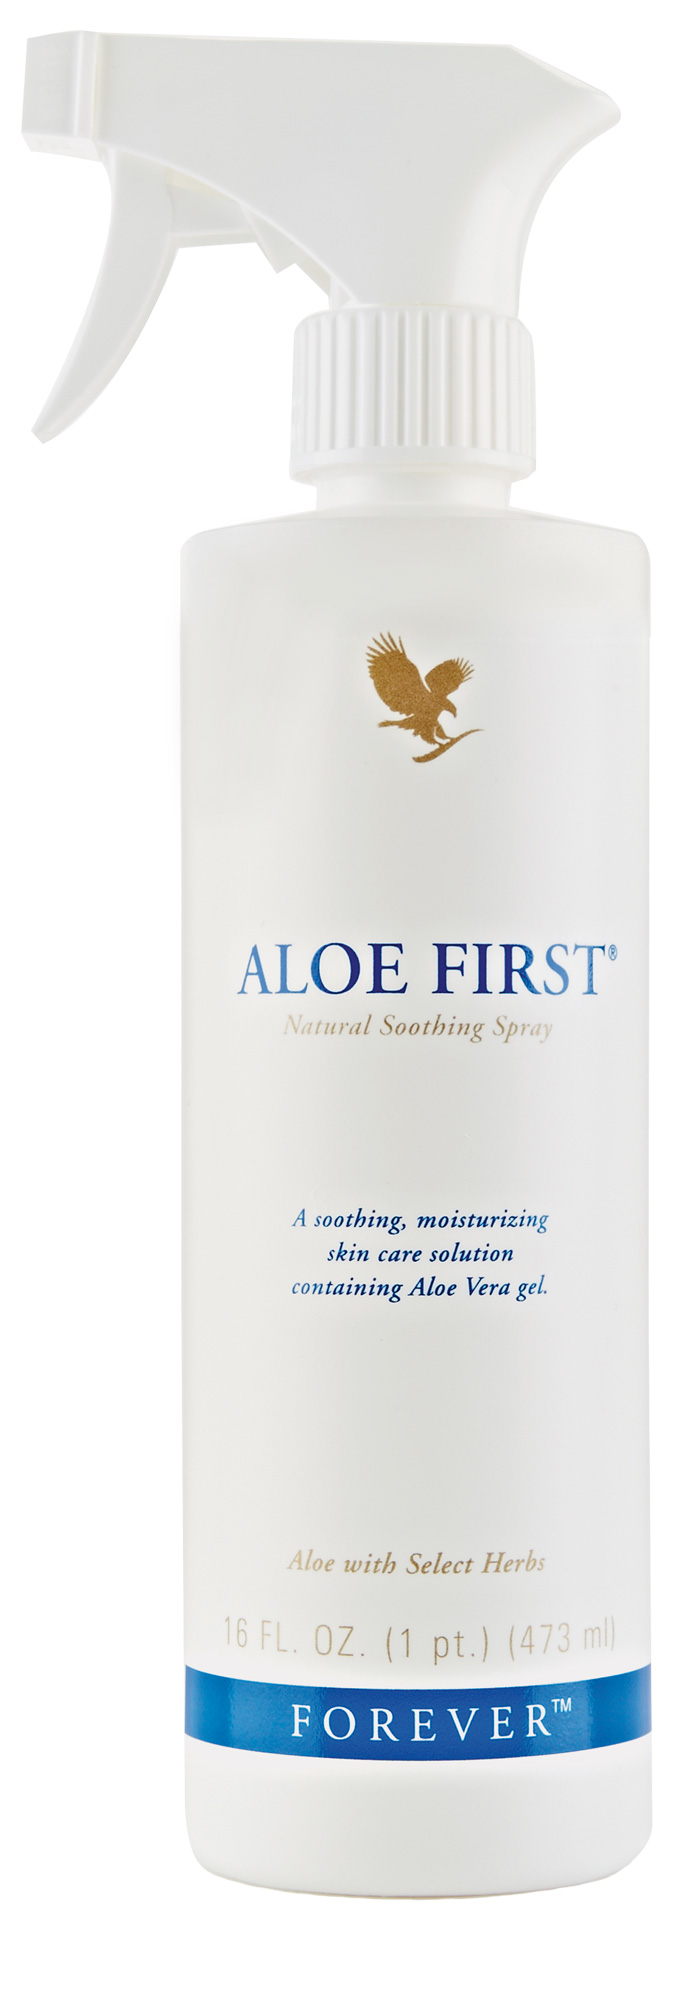 FOREVER Aloe First